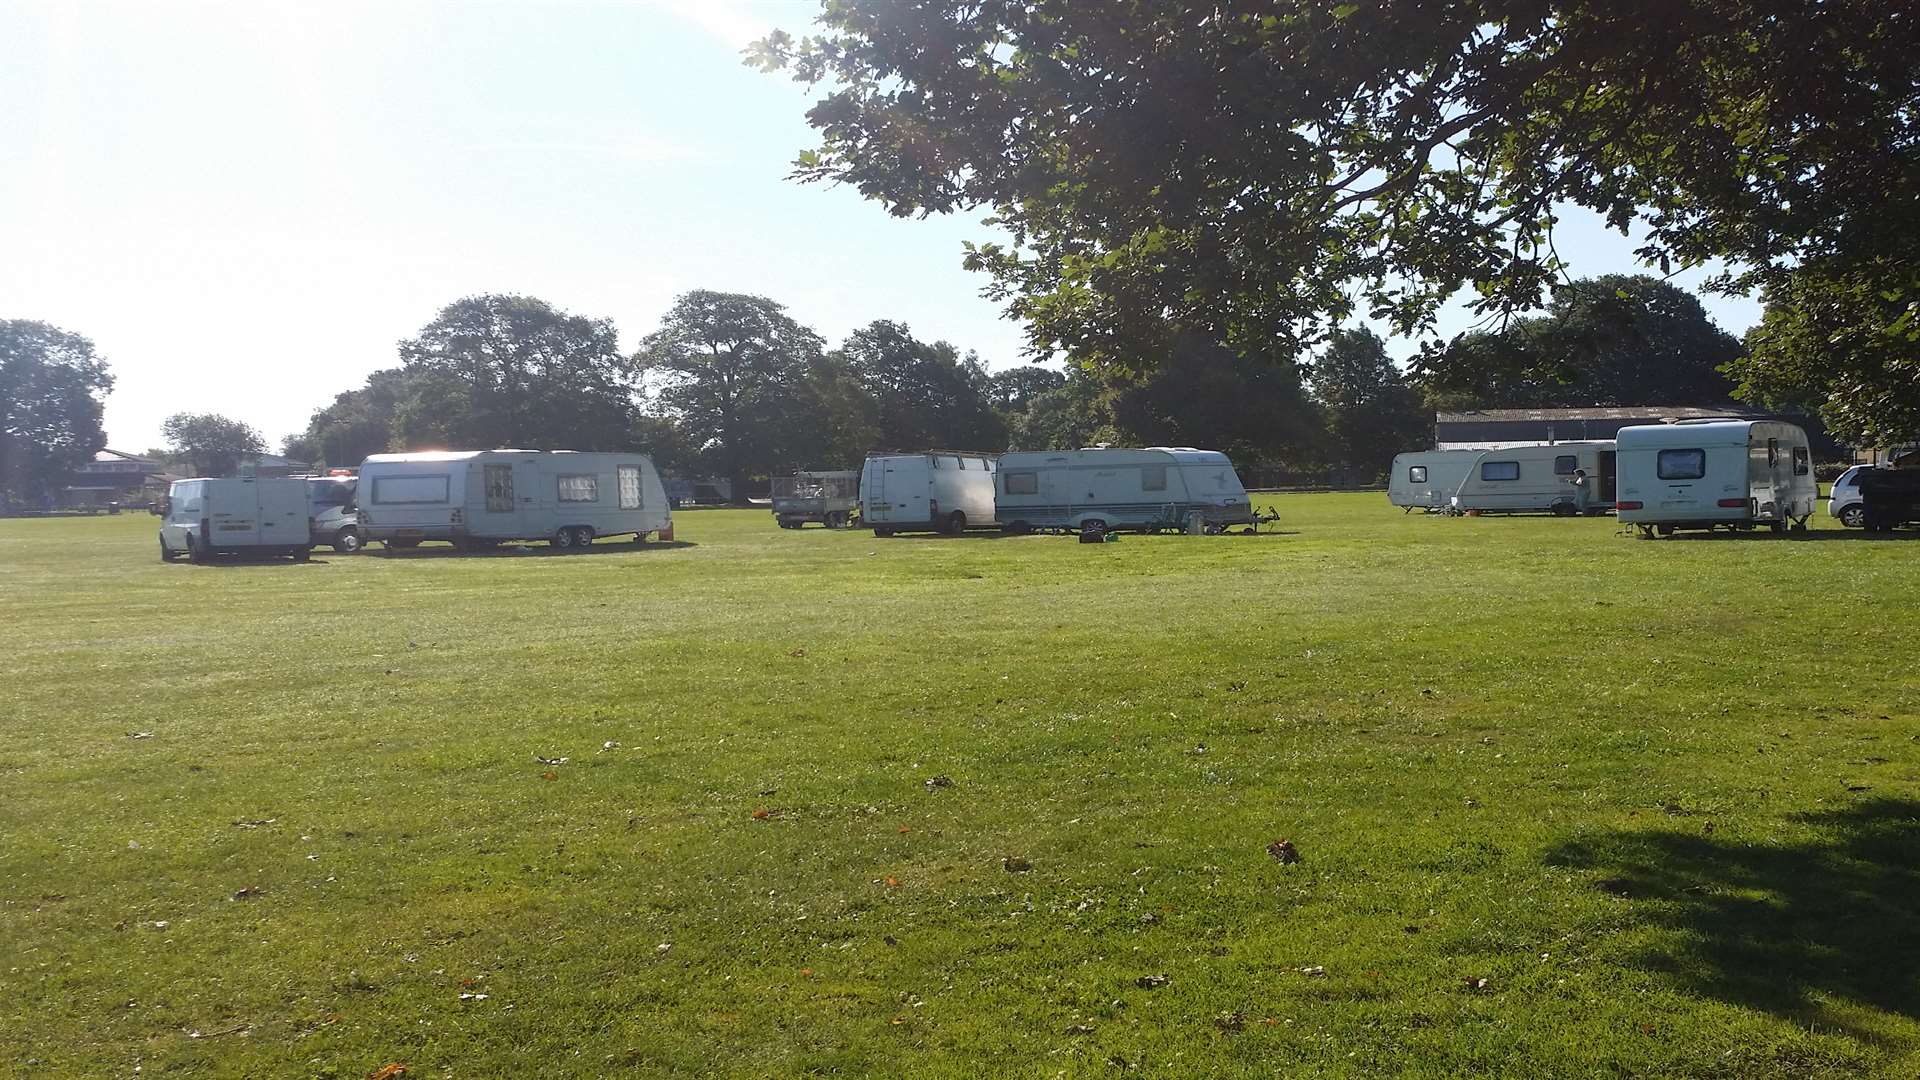 Travellers had arrived at the recreation ground in Park Wood this weekend.